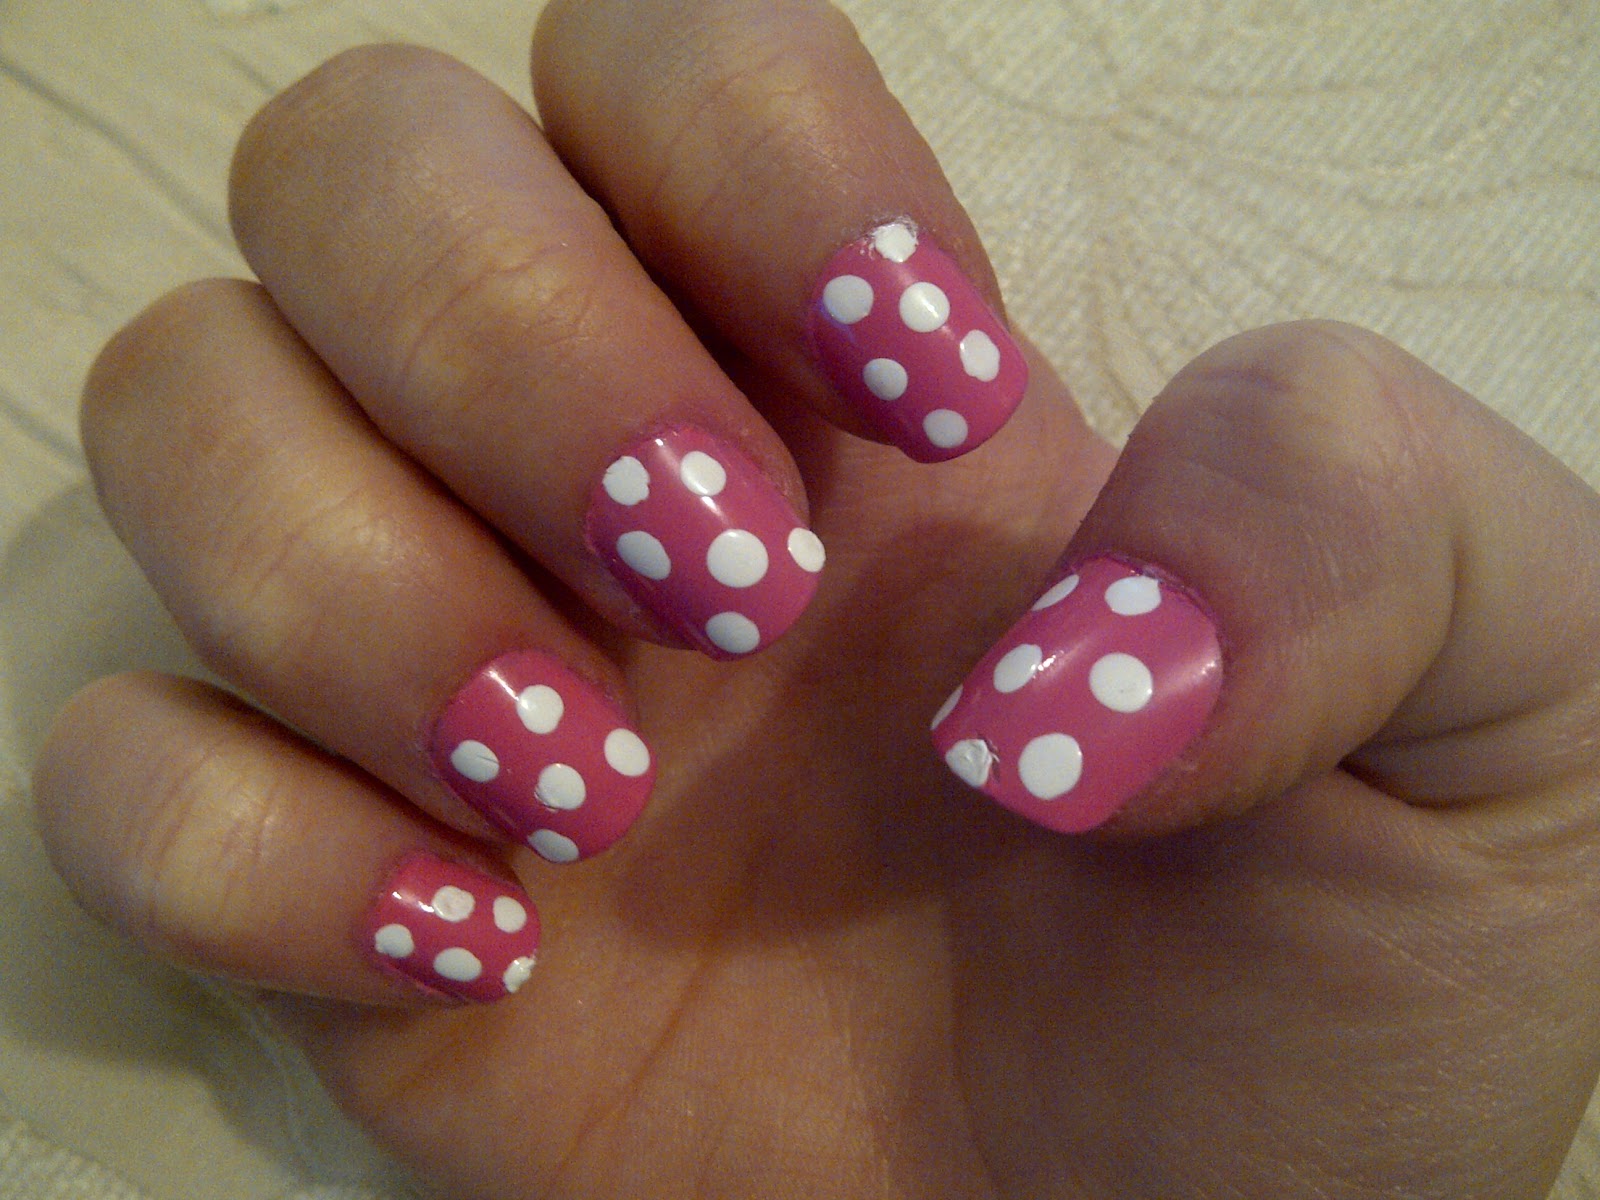 1. Minnie Mouse Nail Art Tutorial for Short Nails - wide 4